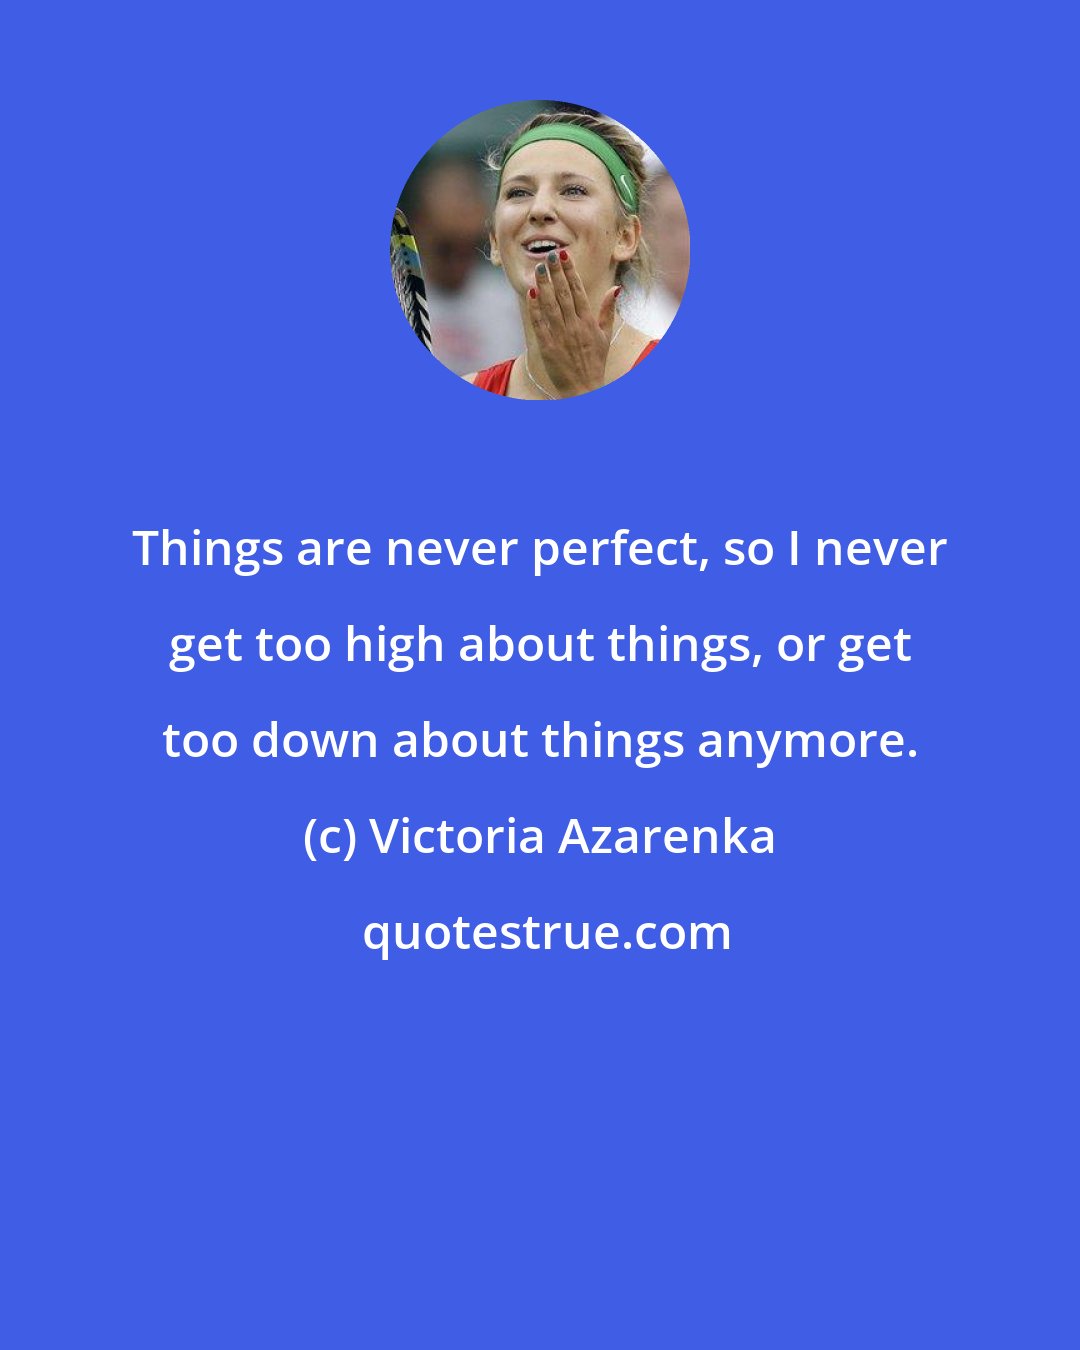 Victoria Azarenka: Things are never perfect, so I never get too high about things, or get too down about things anymore.